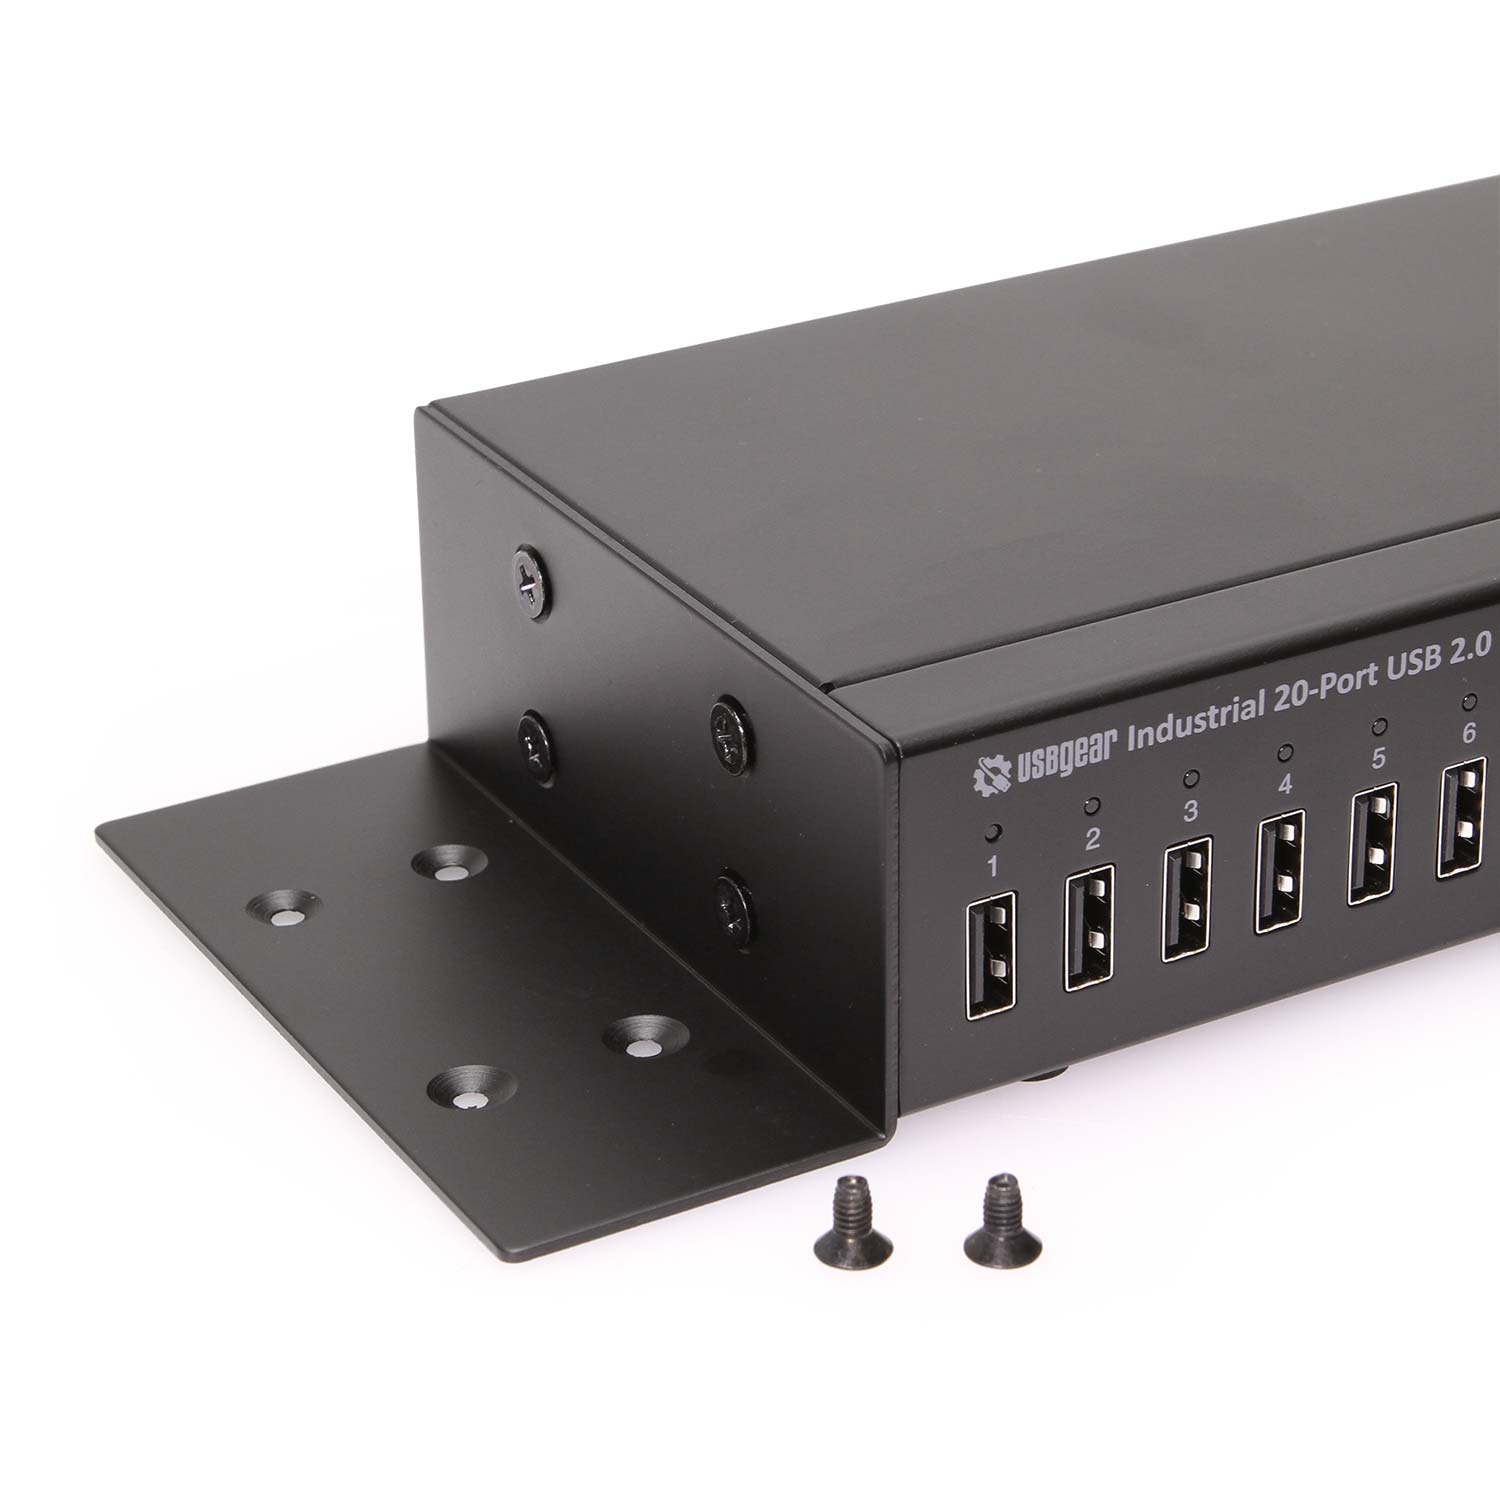 20 Port USB 2.0 Industrial High Power 1.1A Charger Hub w/ ESD Surge  Protection & Port Status LEDs